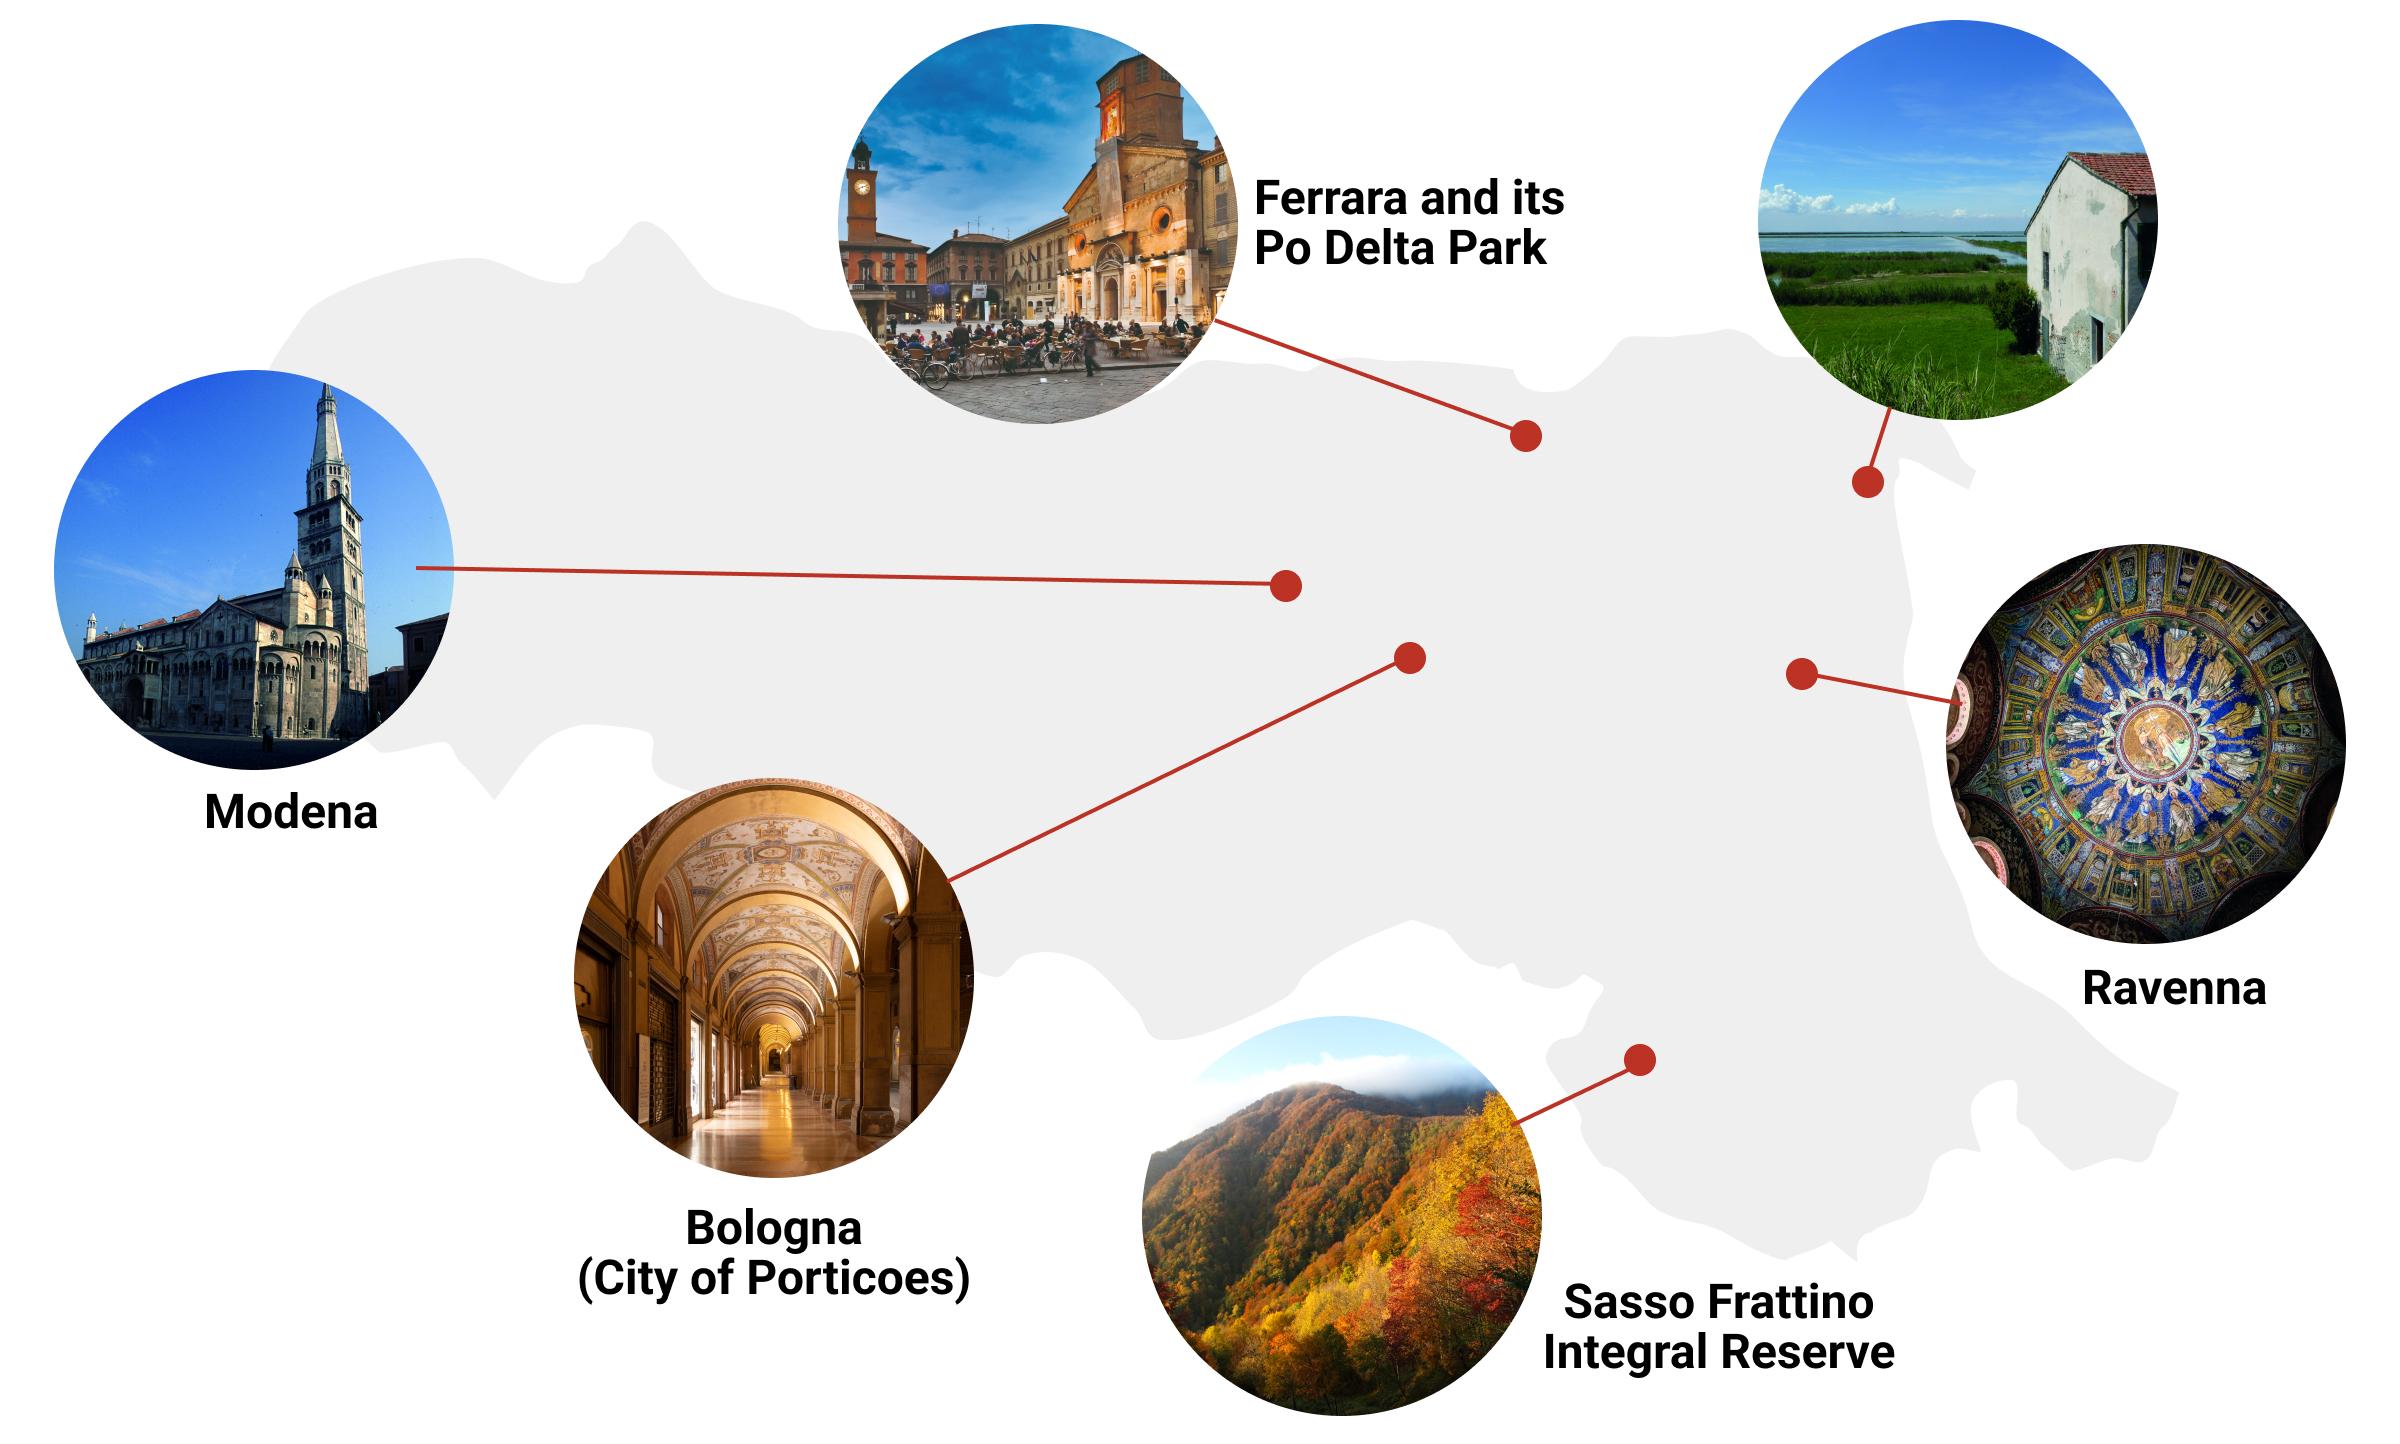 the cultural heritages of Emilia Romagna and their respective cities: Ferrara and the Po Delta Park, Ravenna, Sasso Frattino Integral Reserve, Bologna (City of Porticoes), Modena. 